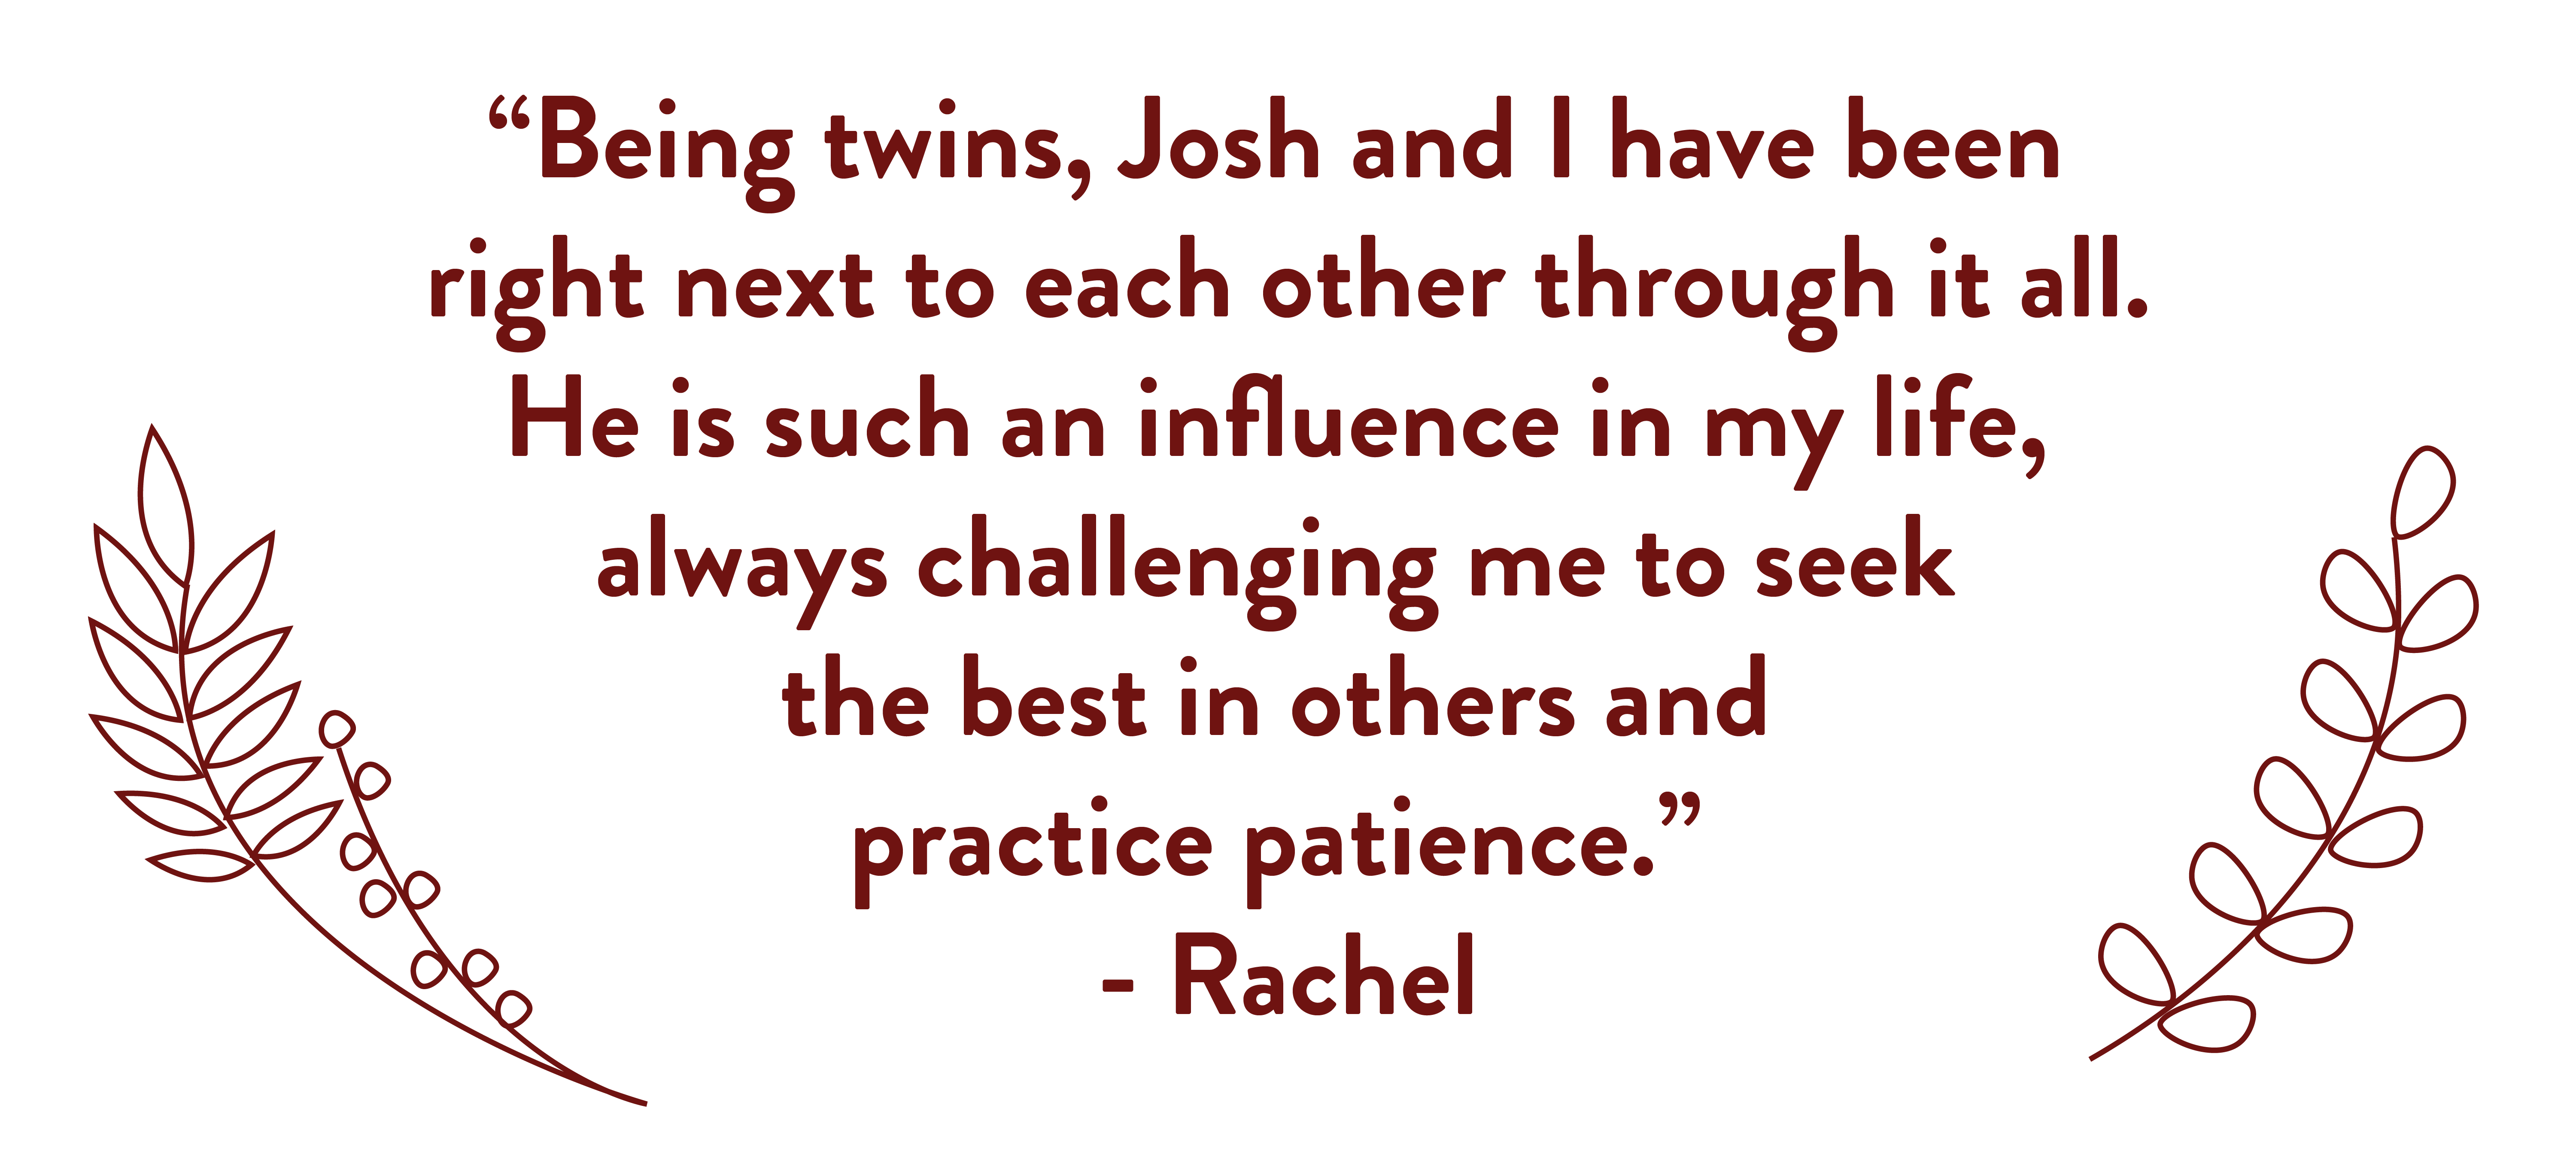 Quote from Rachel about Josh.